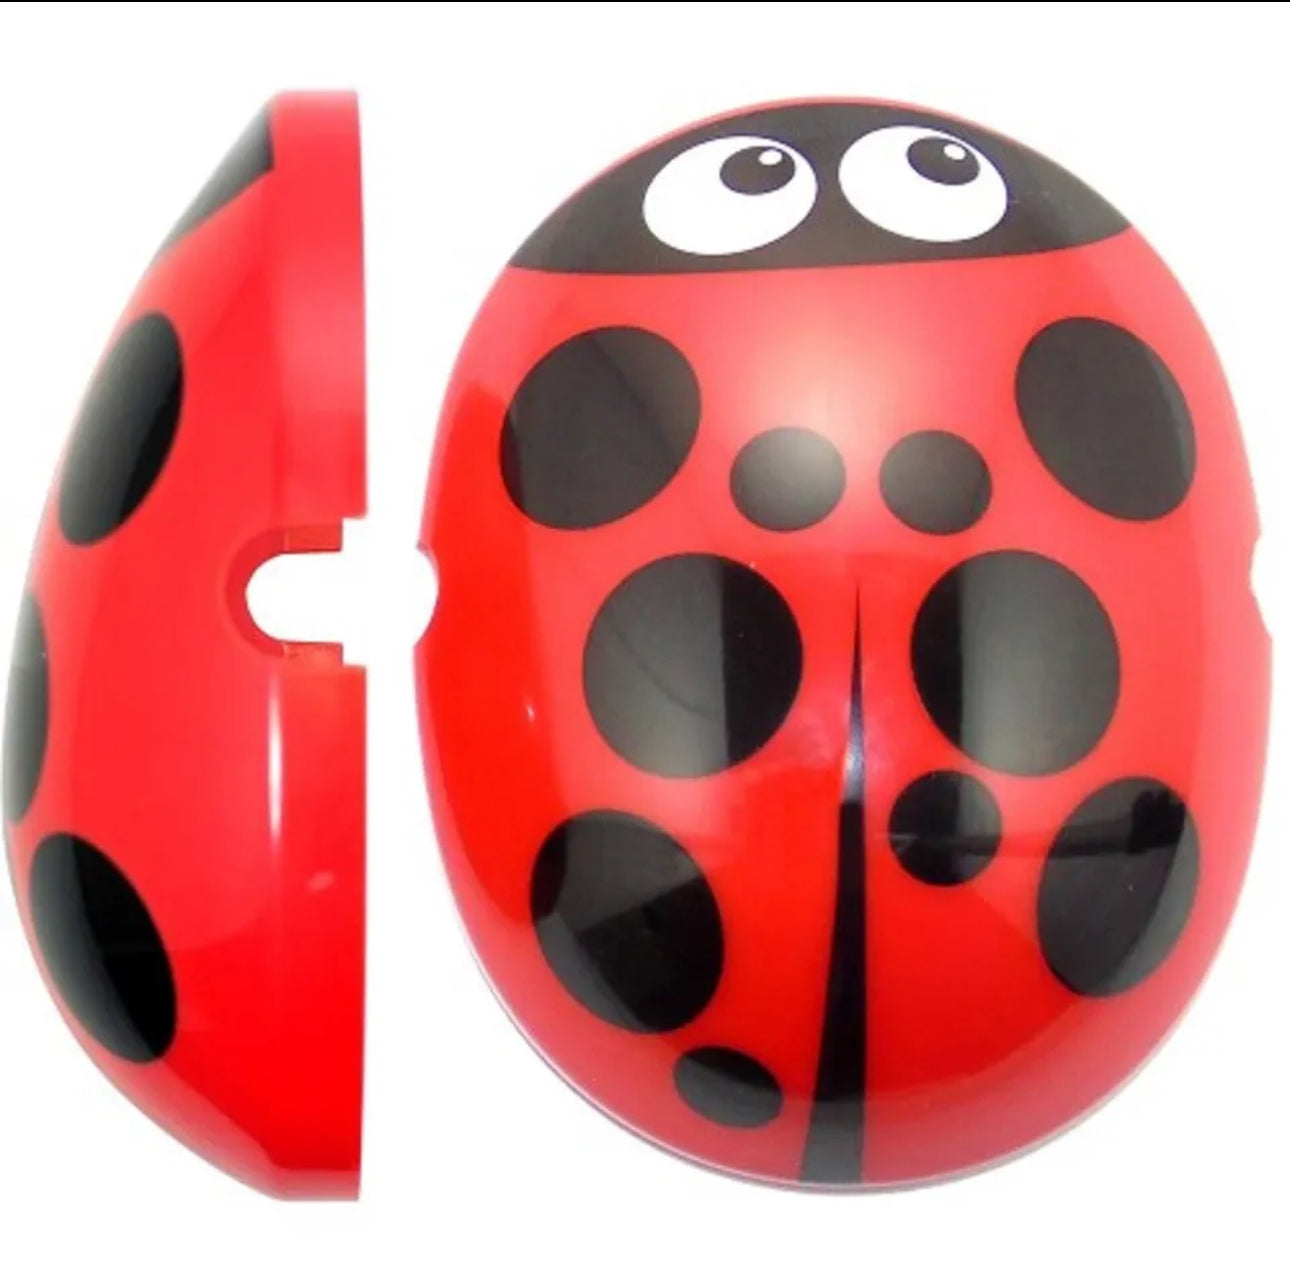 End Cap Covers For Ear Defenders